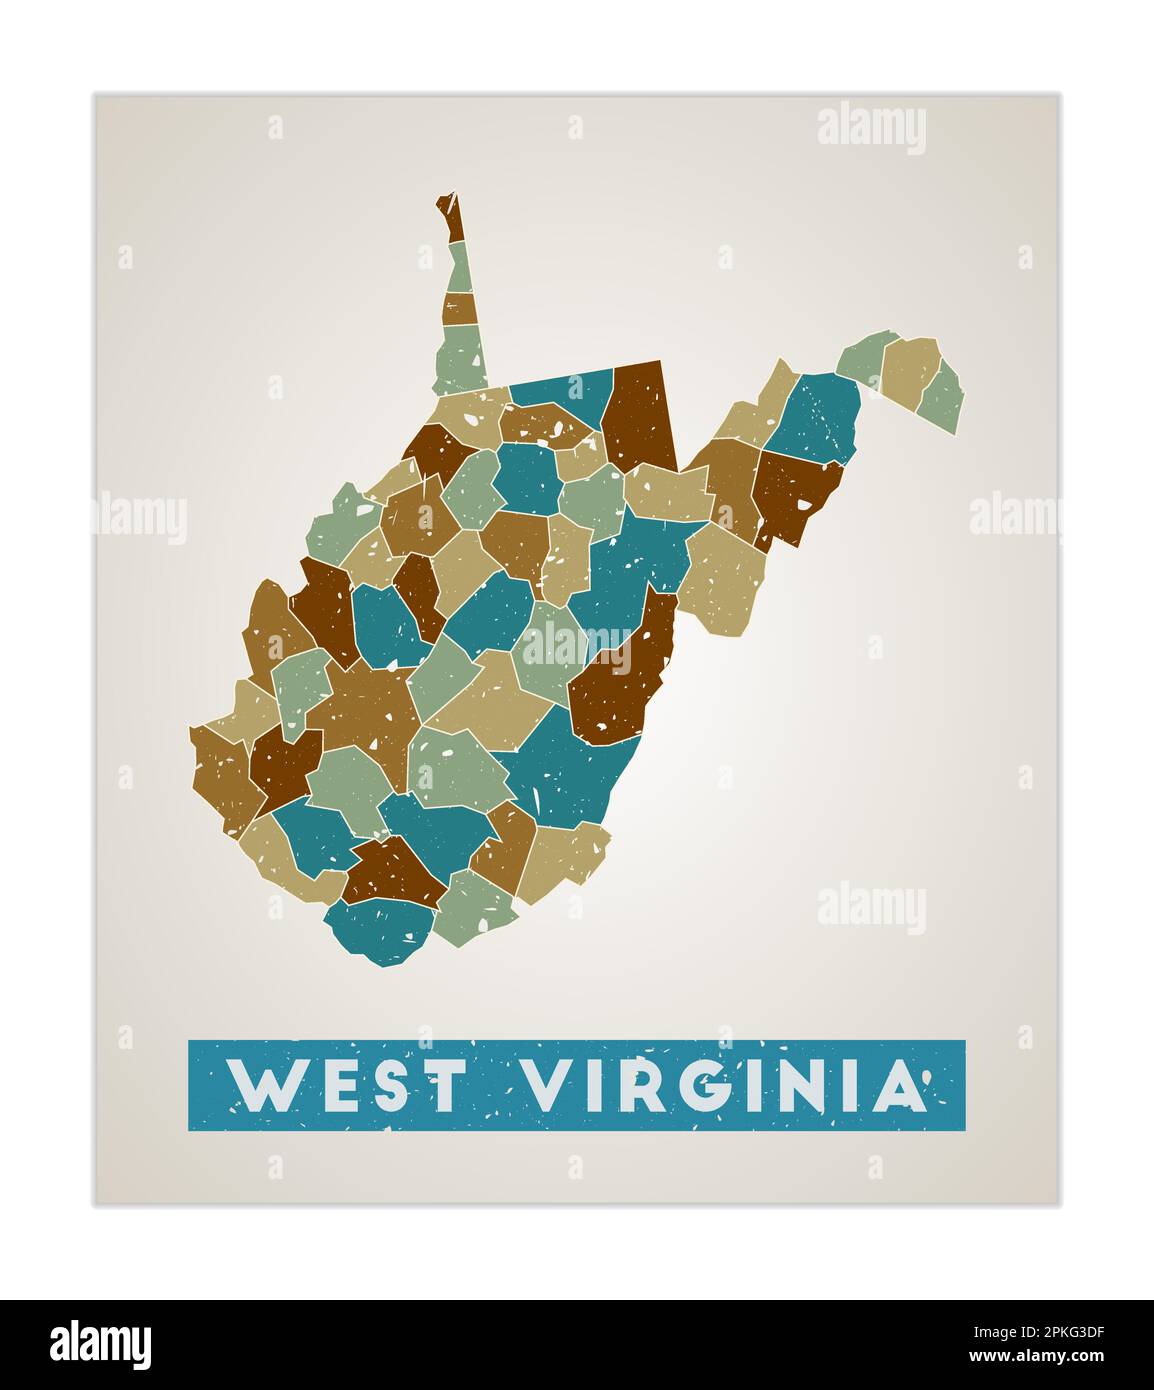 West Virginia map. Us state poster with regions. Old grunge texture. Shape of West Virginia with us state name. Appealing vector illustration. Stock Vector